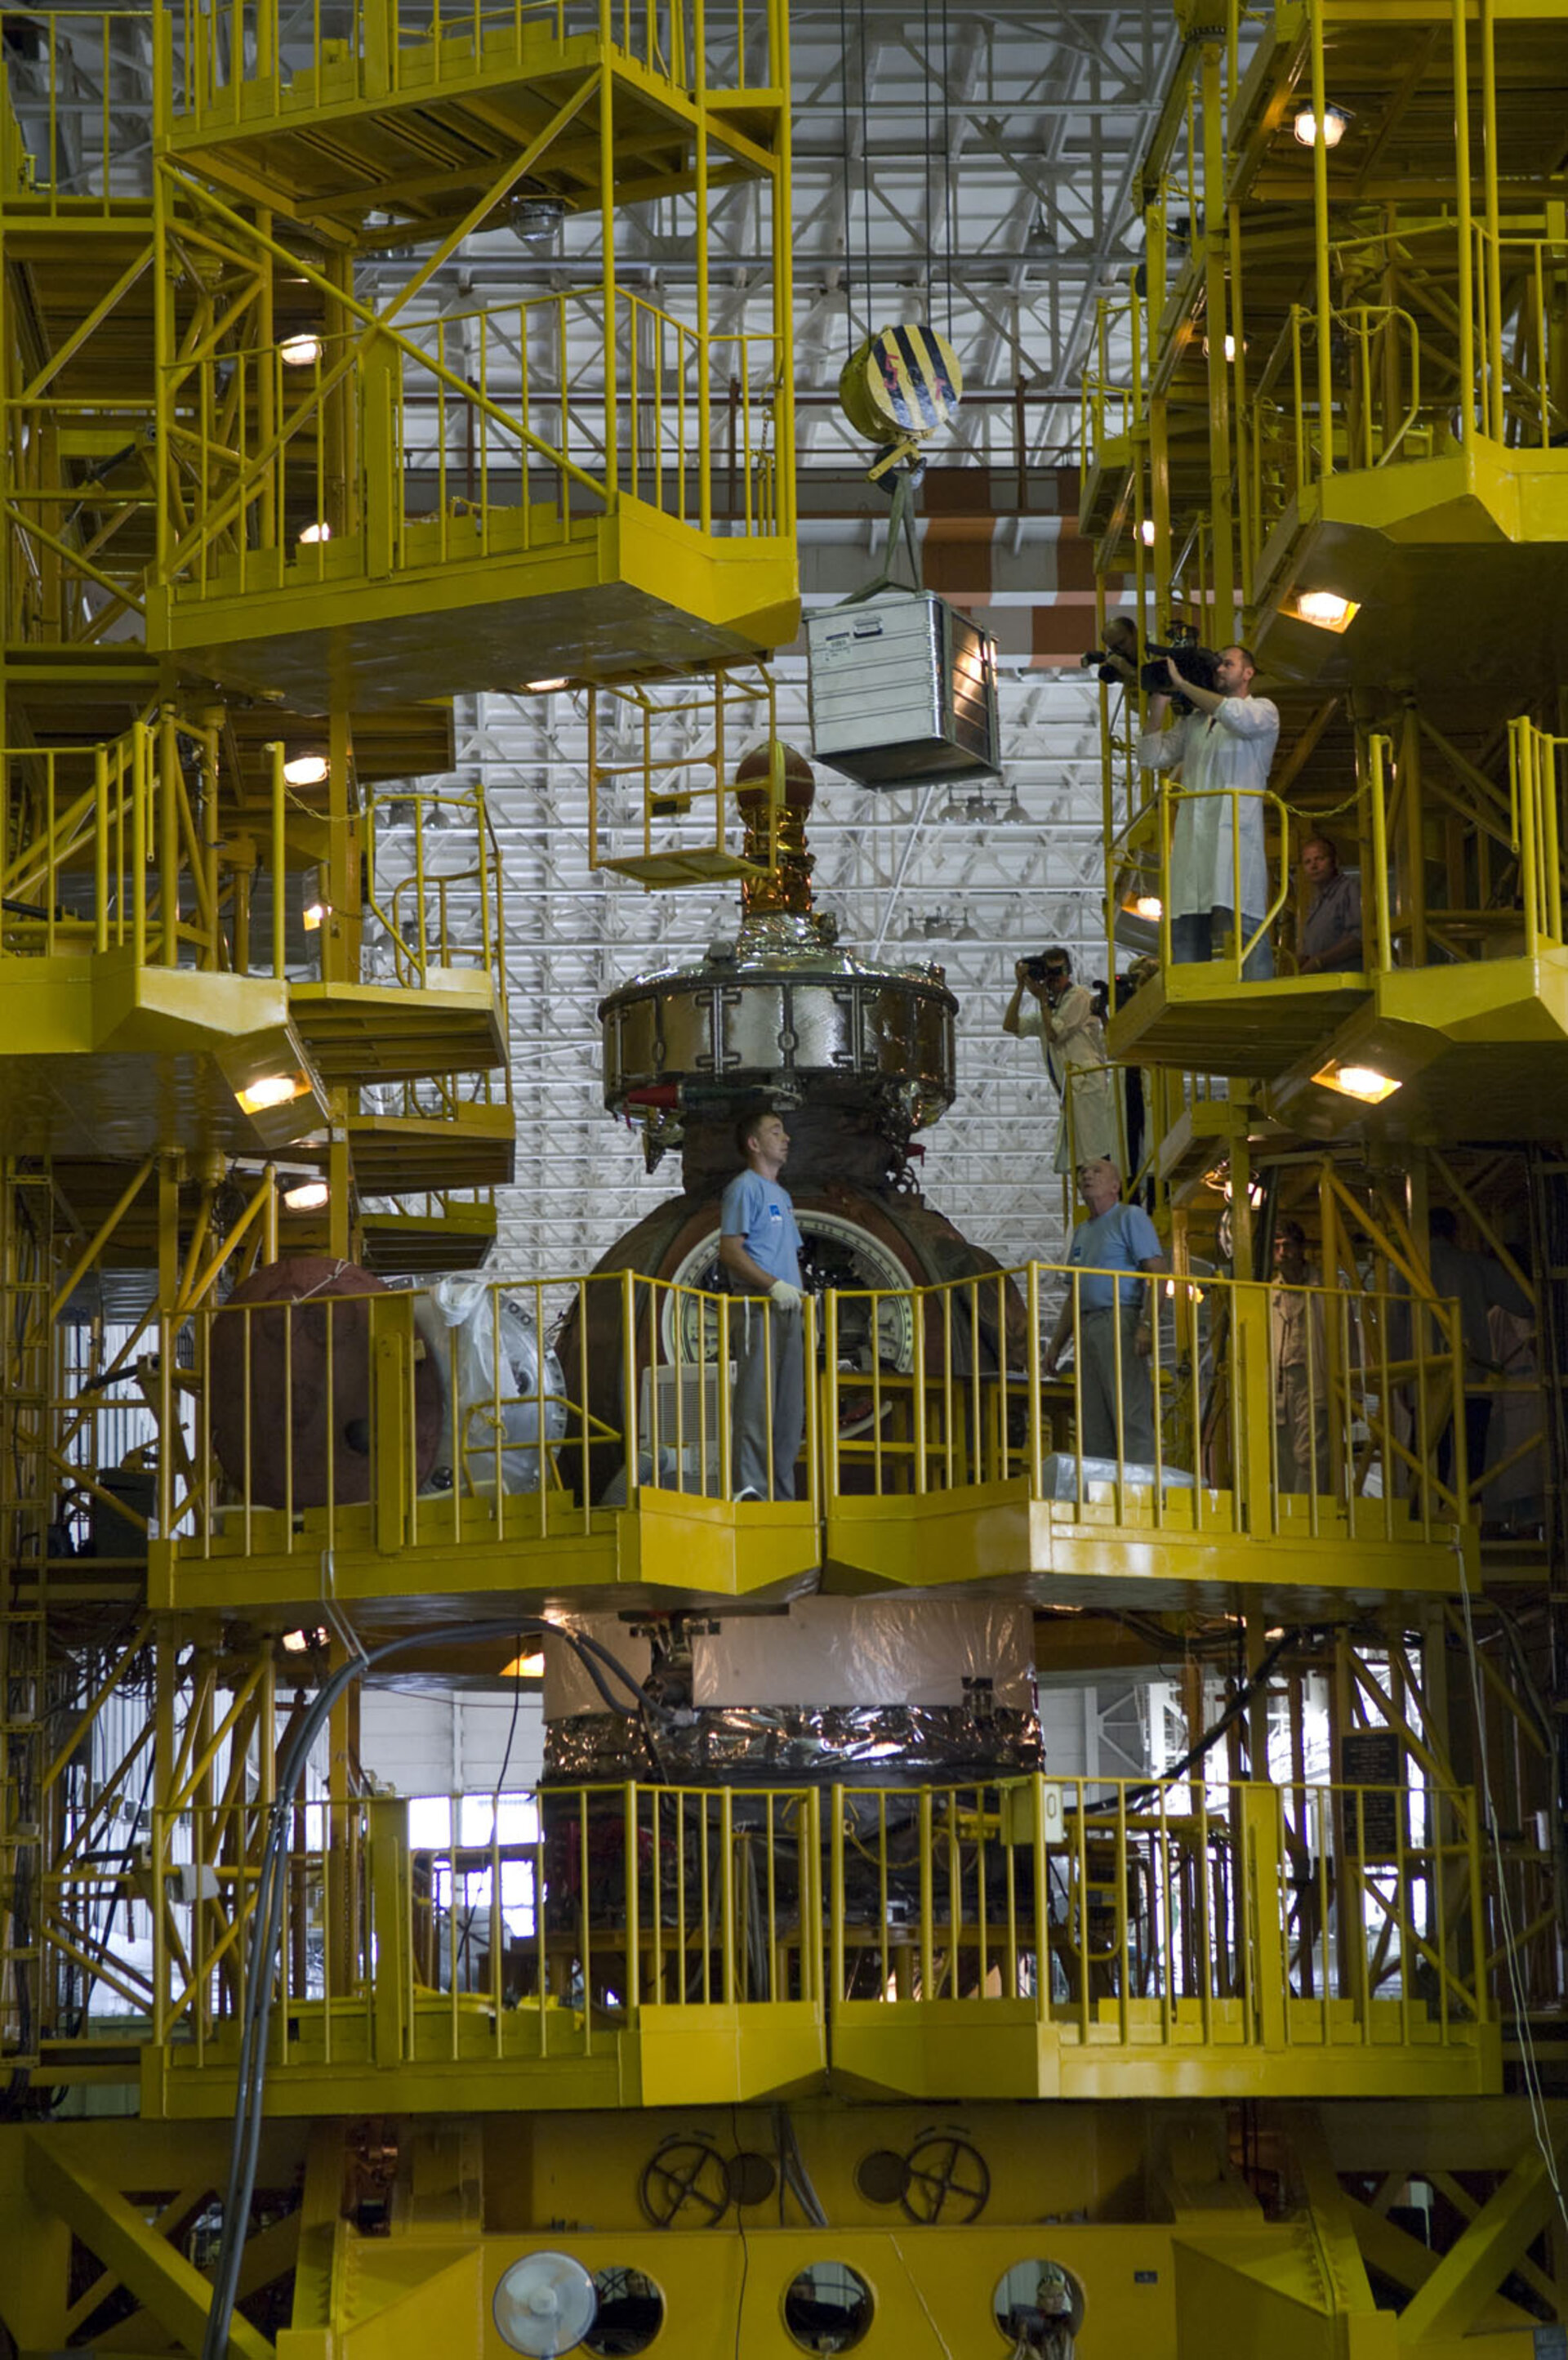 Preparation of the Foton-M3 spacecraft in the MIK Building at Baikonur Cosmodrome